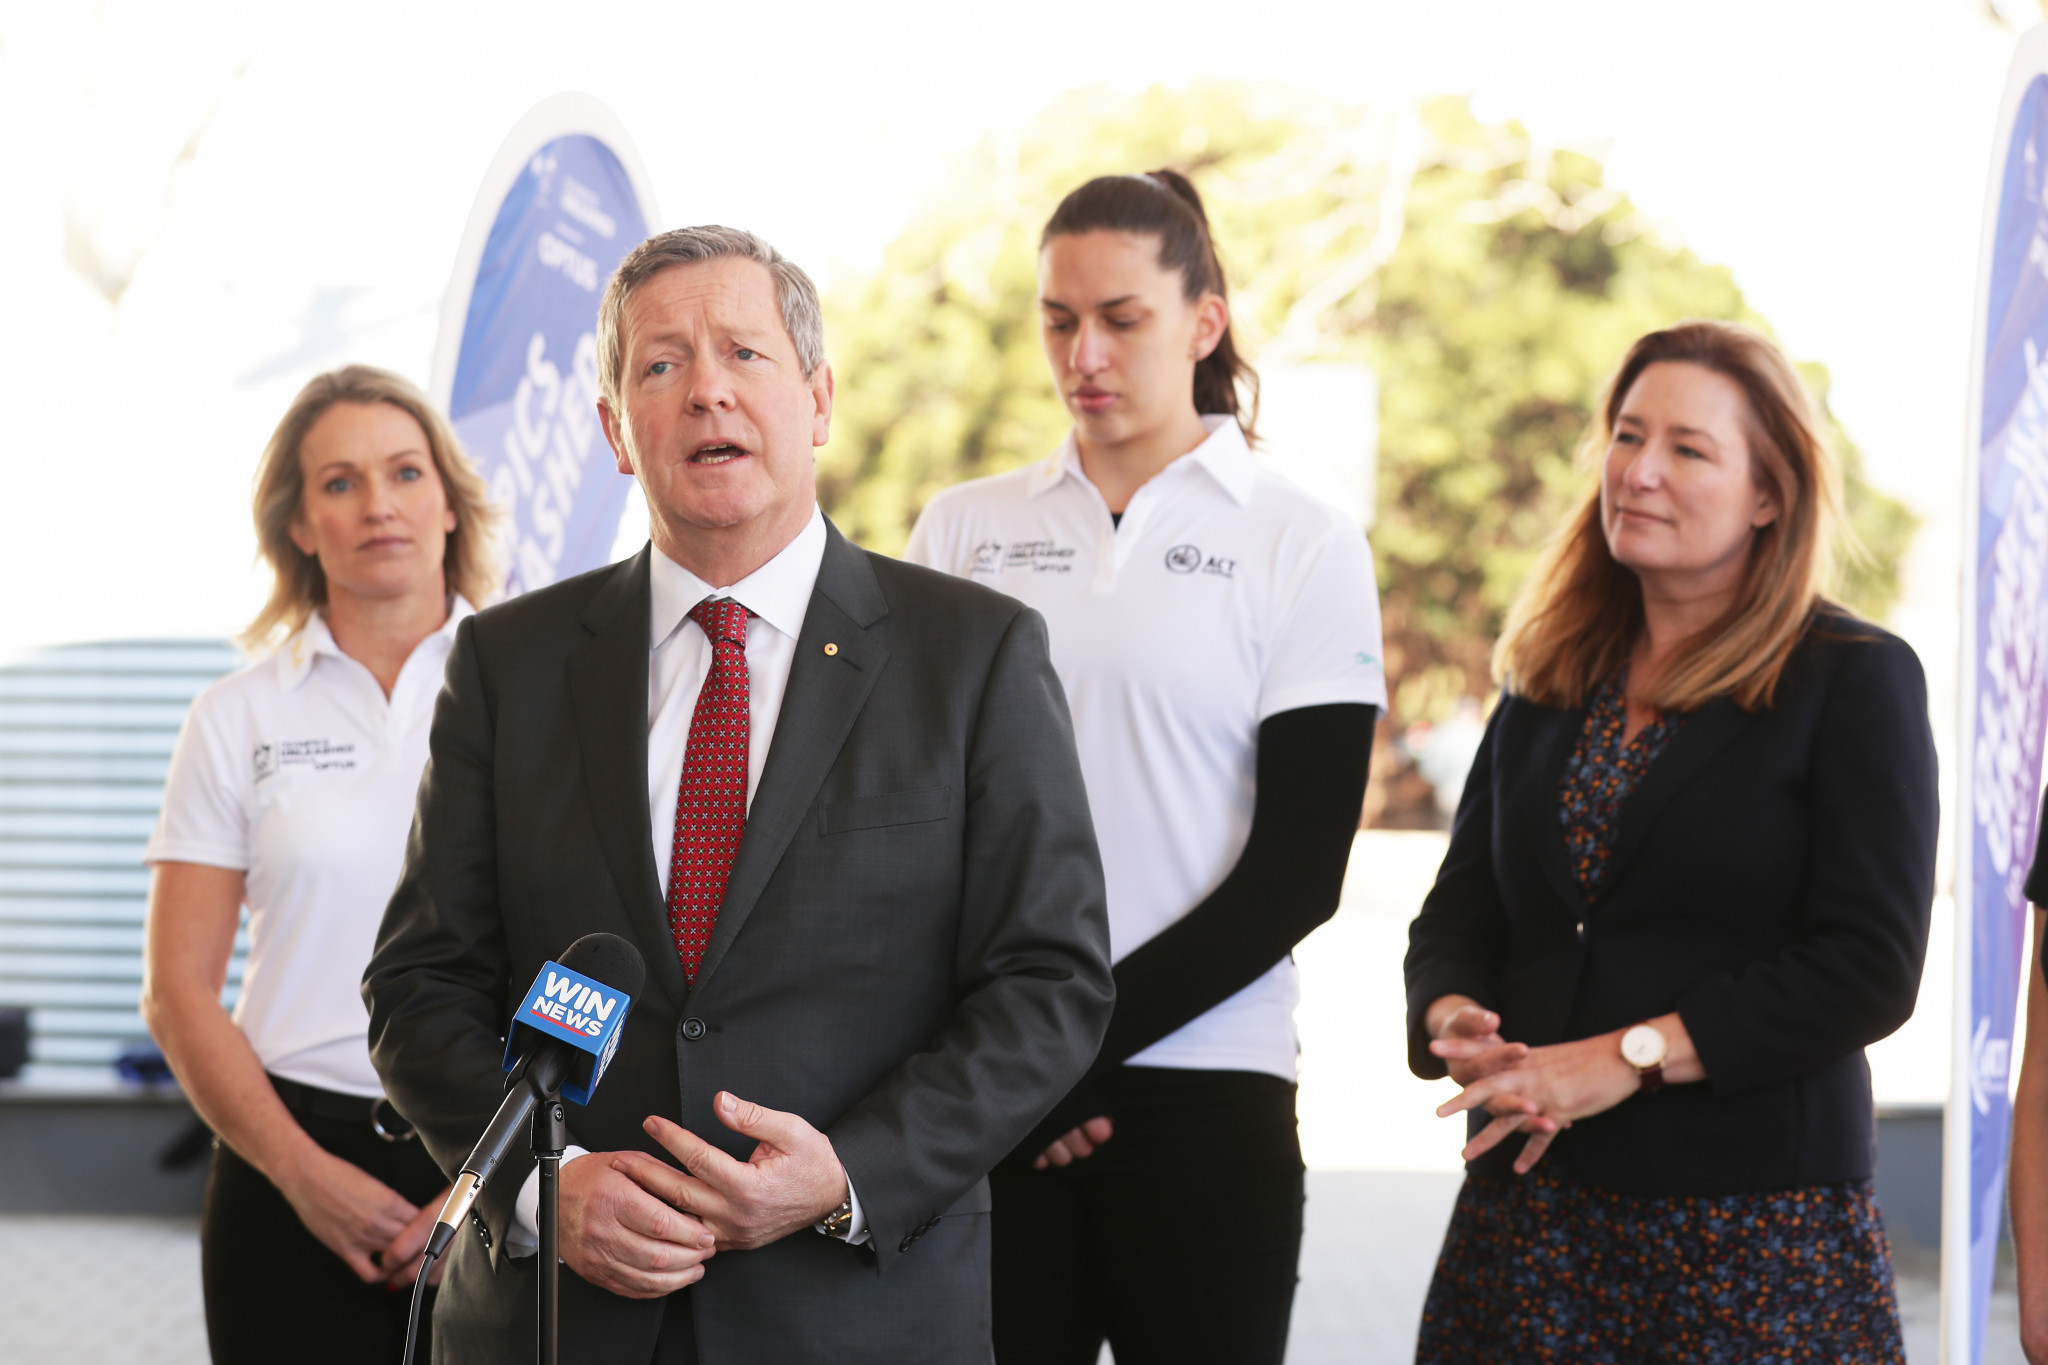 Australia Olympic Committee chief executive Matt Carroll speaks during the Olympic Unleashed unveiling at Ainslie School in Canberra ©Getty Images